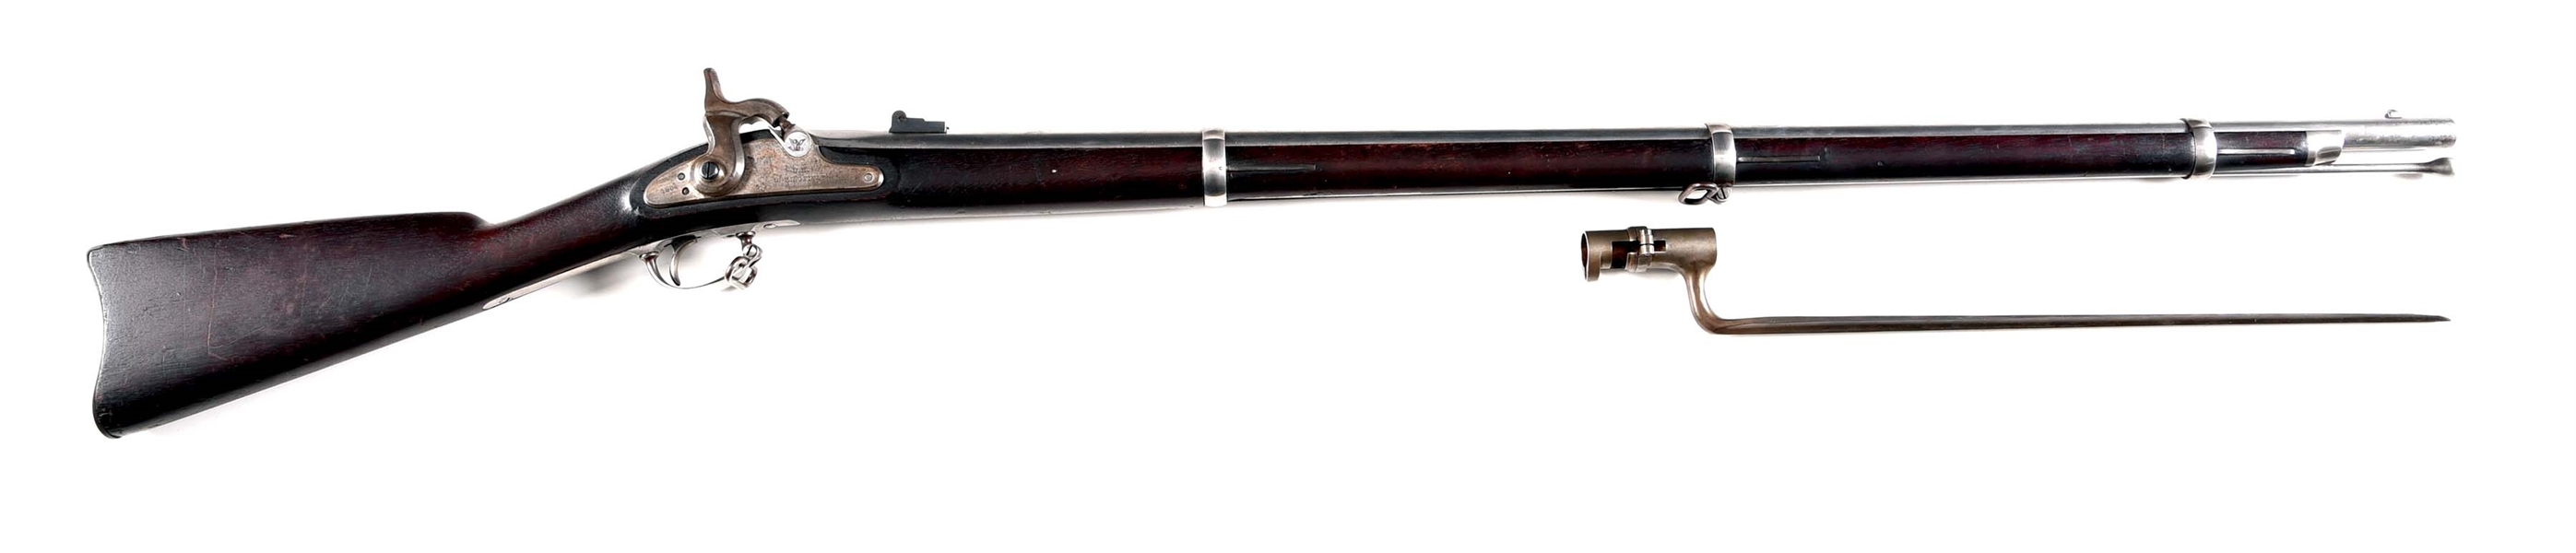 (A) US SPRINGFIELD MODEL 1863 TYPE II PERCUSSION RIFLED MUSKET DATED 1864.